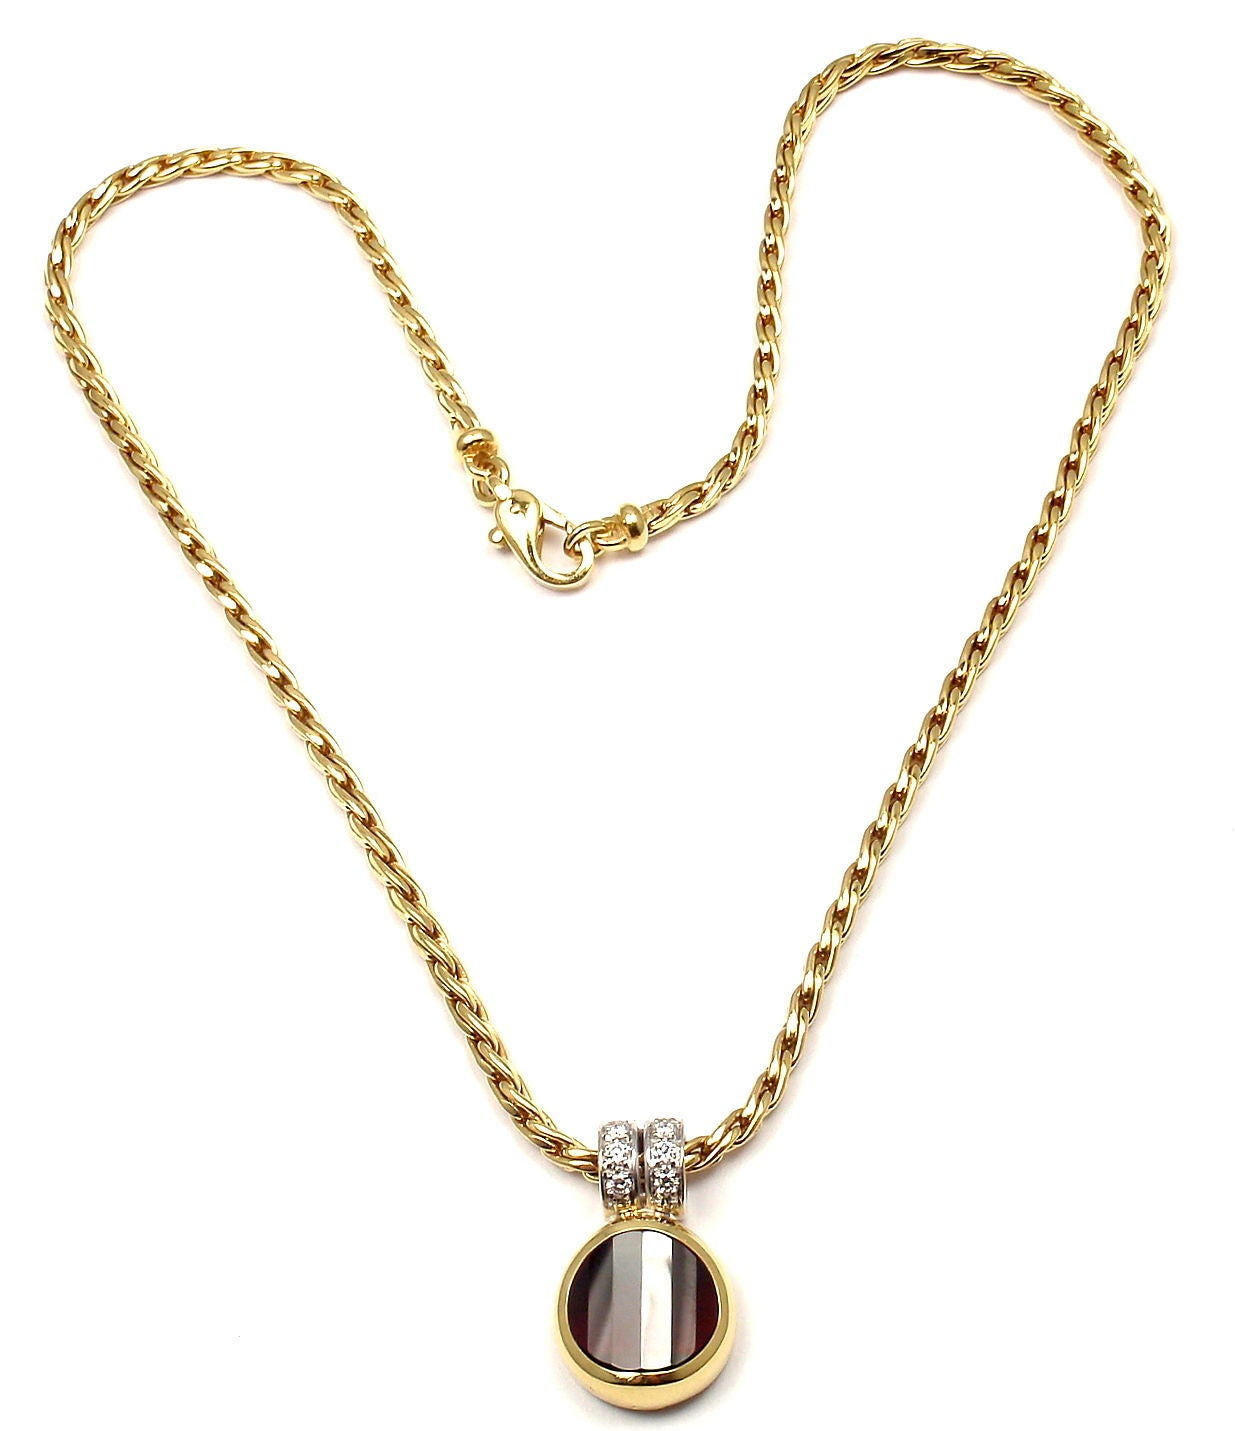 18k Yellow Gold Garnet Pendant Link Necklace by Pomellato. 
With 1 garnet 14mm x 13mm
8 round brilliant cut diamonds VS1 clarity, G color
total weight approx. .25ct

This necklace comes with original box and certificate.

Details: 
Weight: